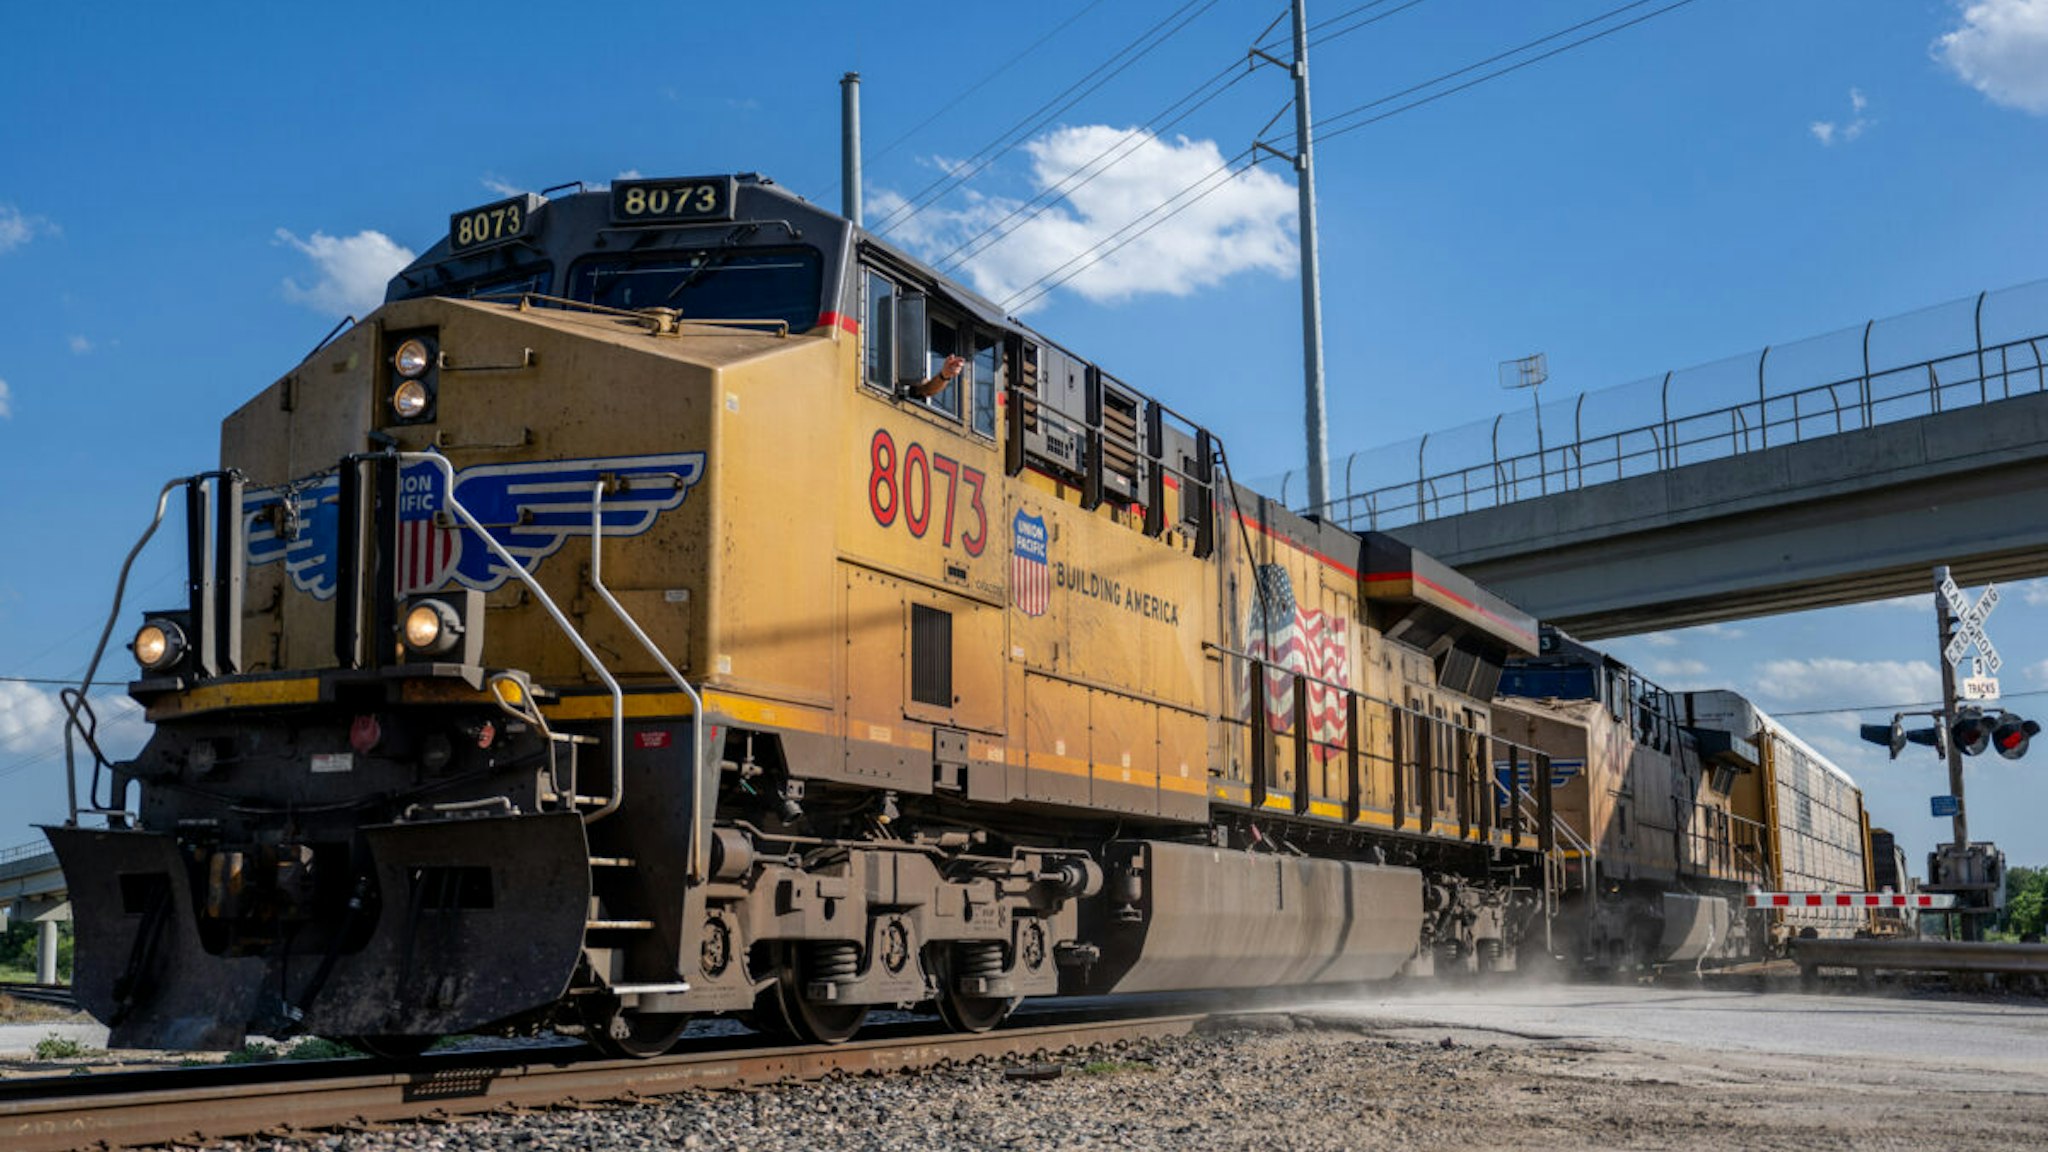 A Union Pacific freight train is seen traveling on April 21, 2023 in Round Rock, Texas. Union Pacific Railroad reported low quarterly earnings, signaling an economic slowdown.